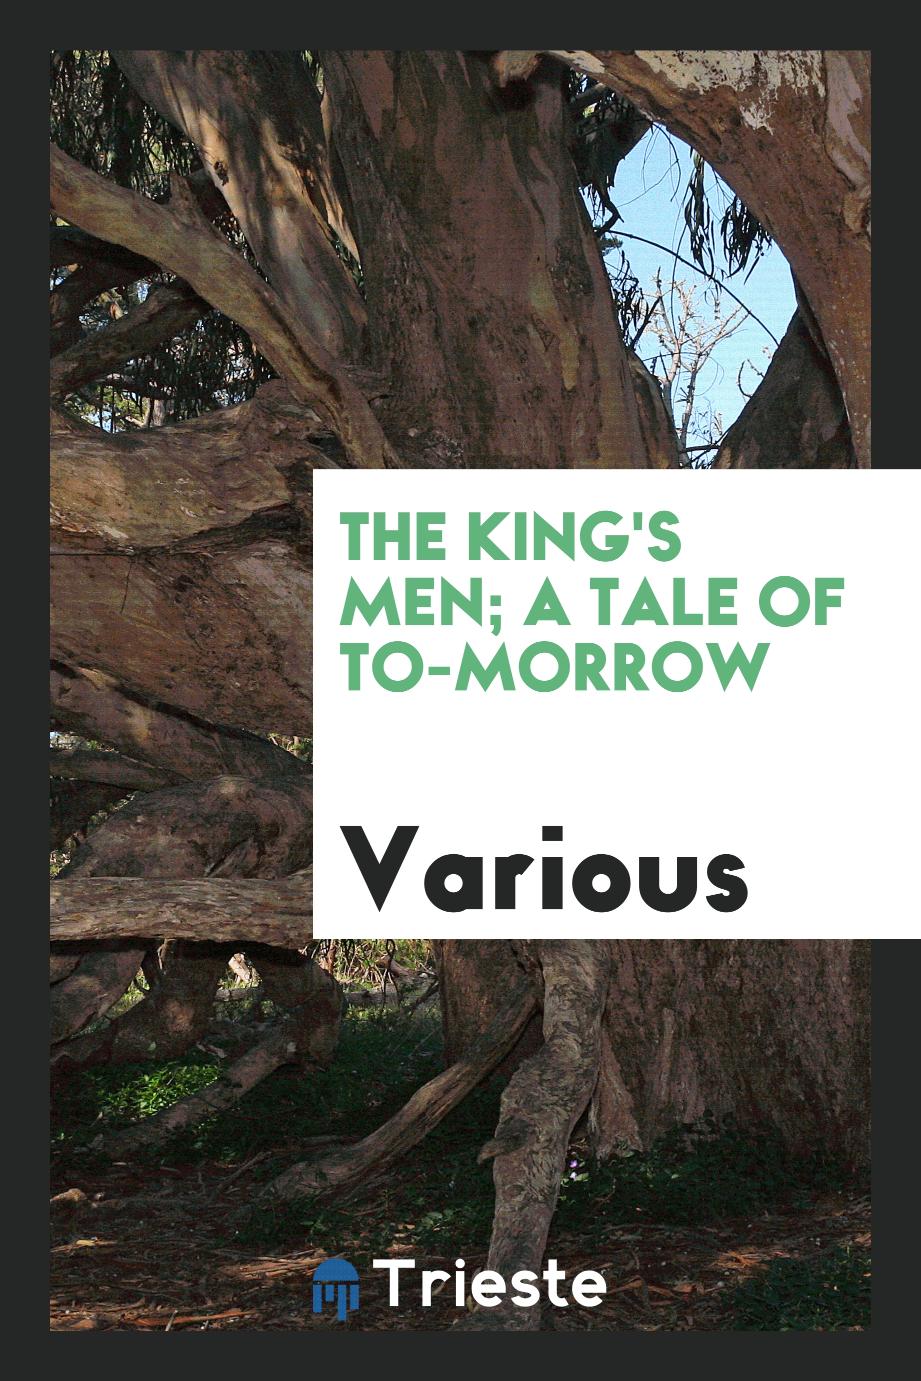 The king's men; a tale of to-morrow